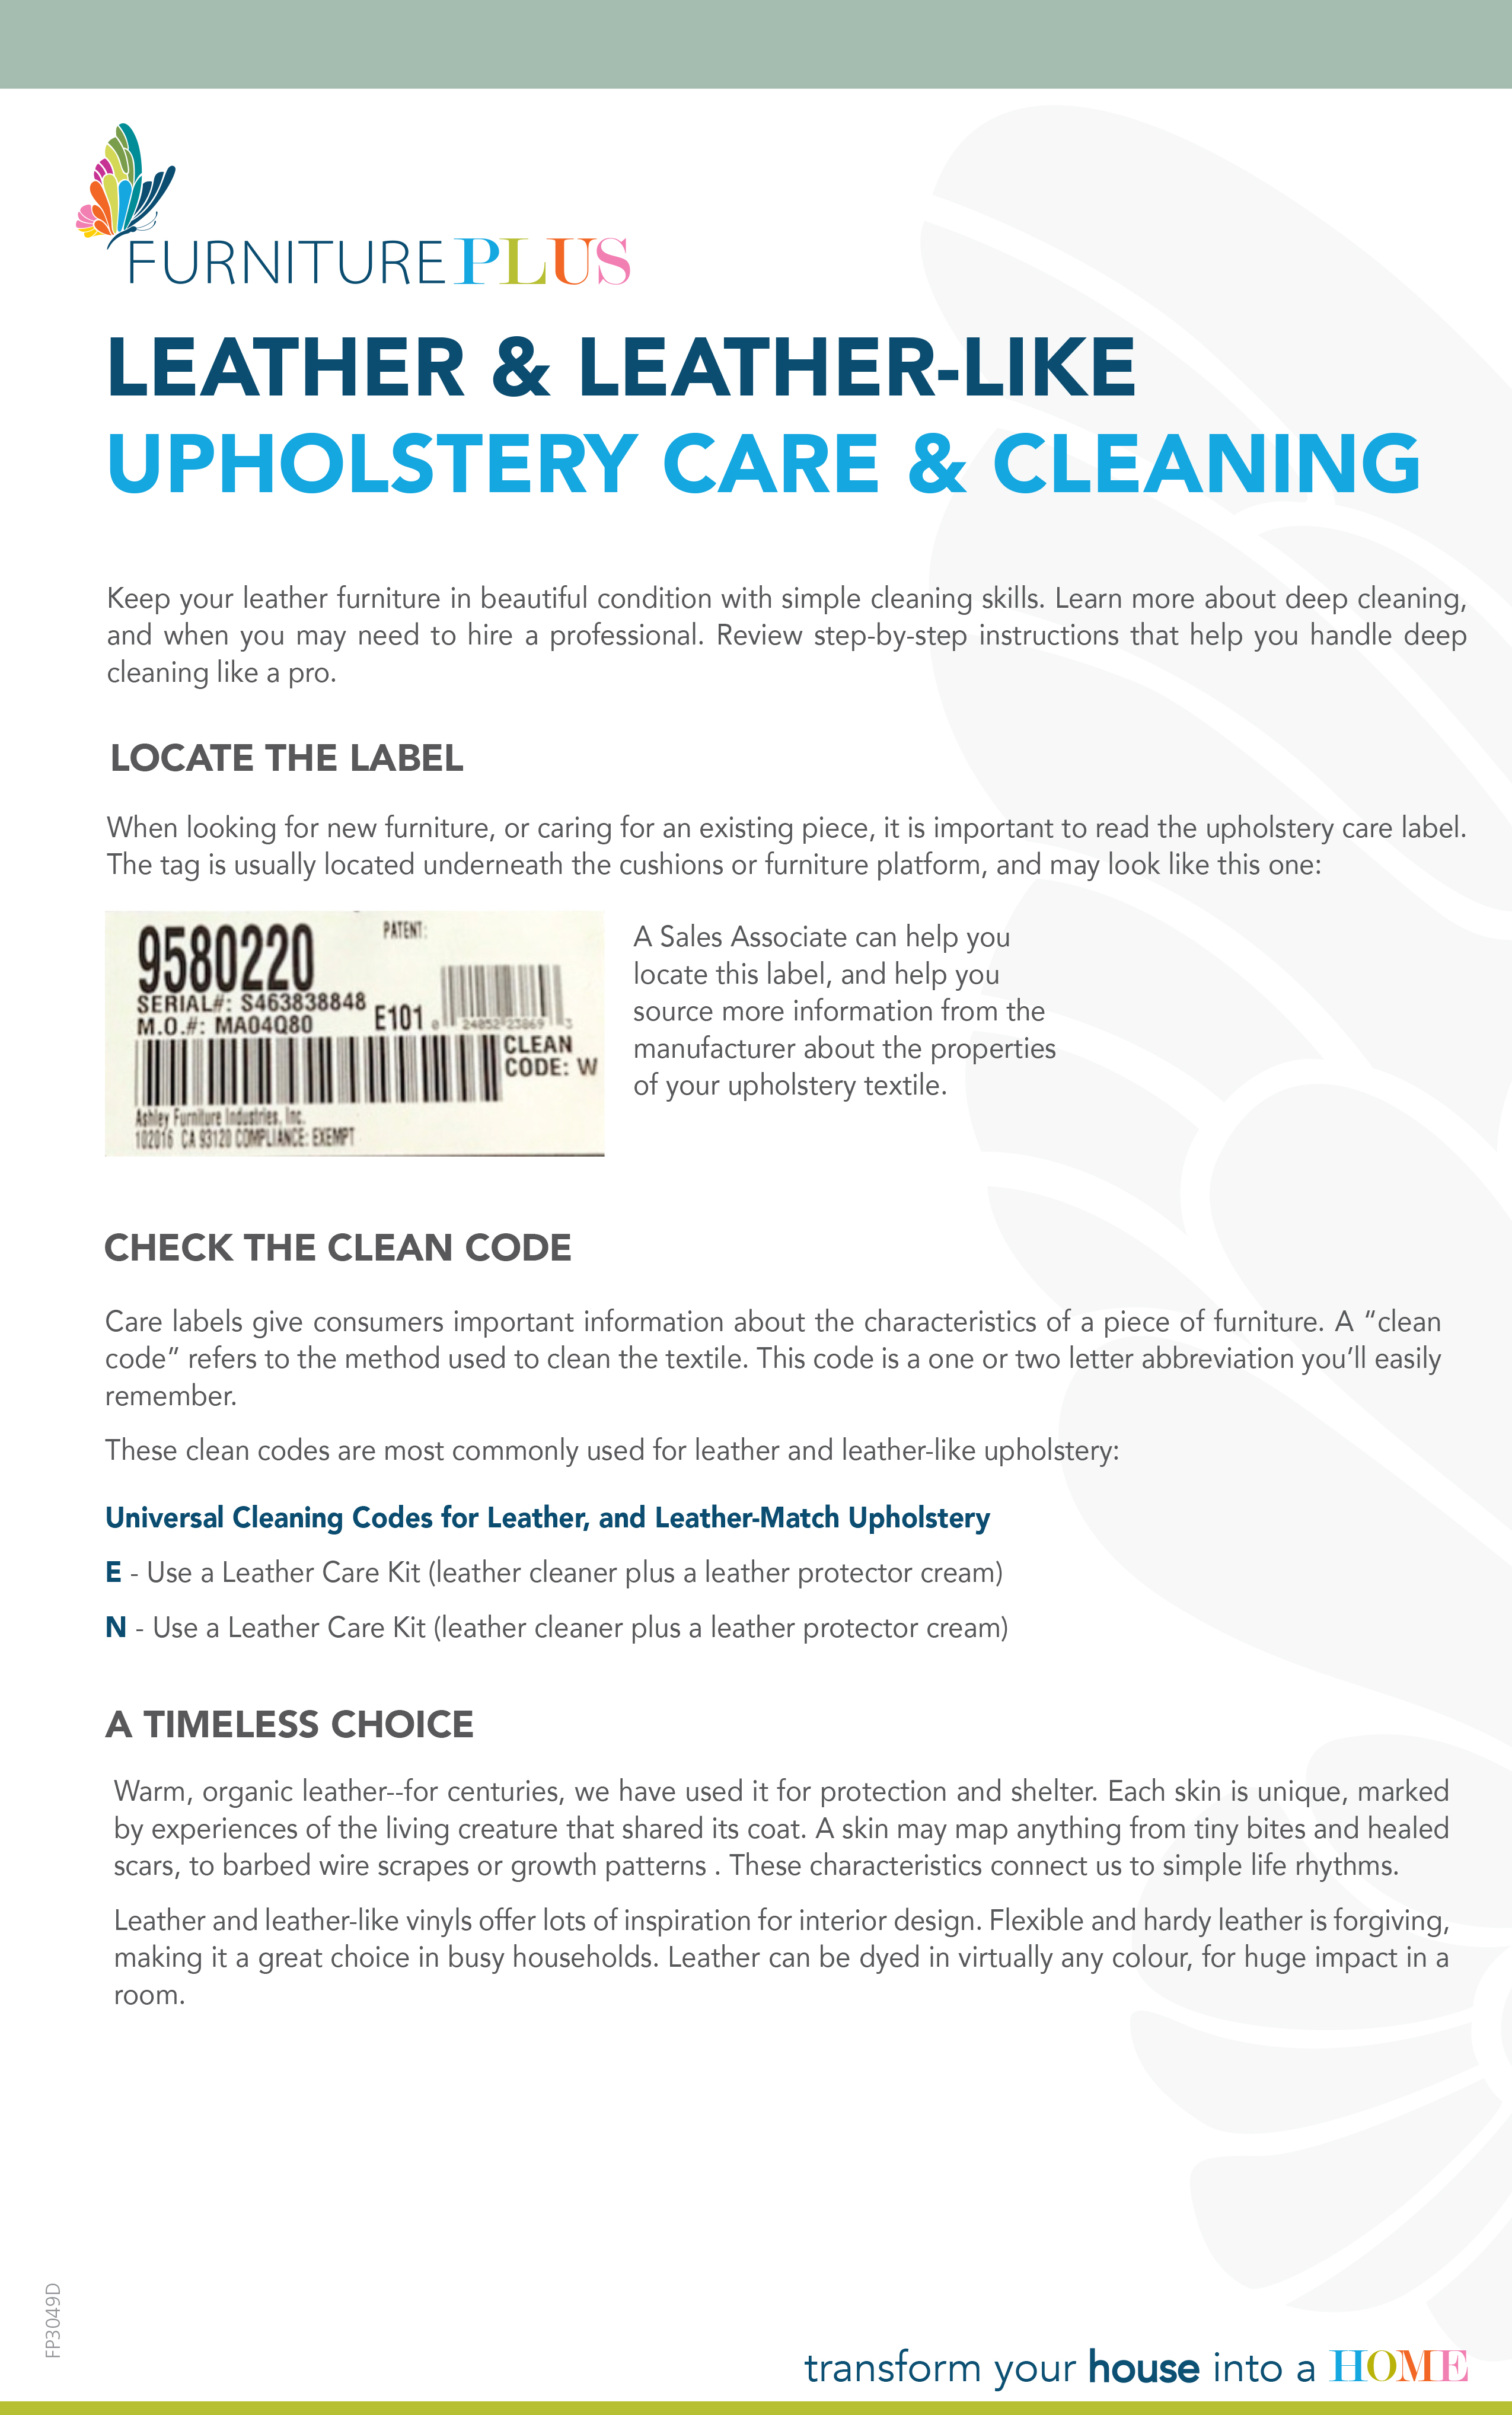 Upholstery Leather Care - Step by Step